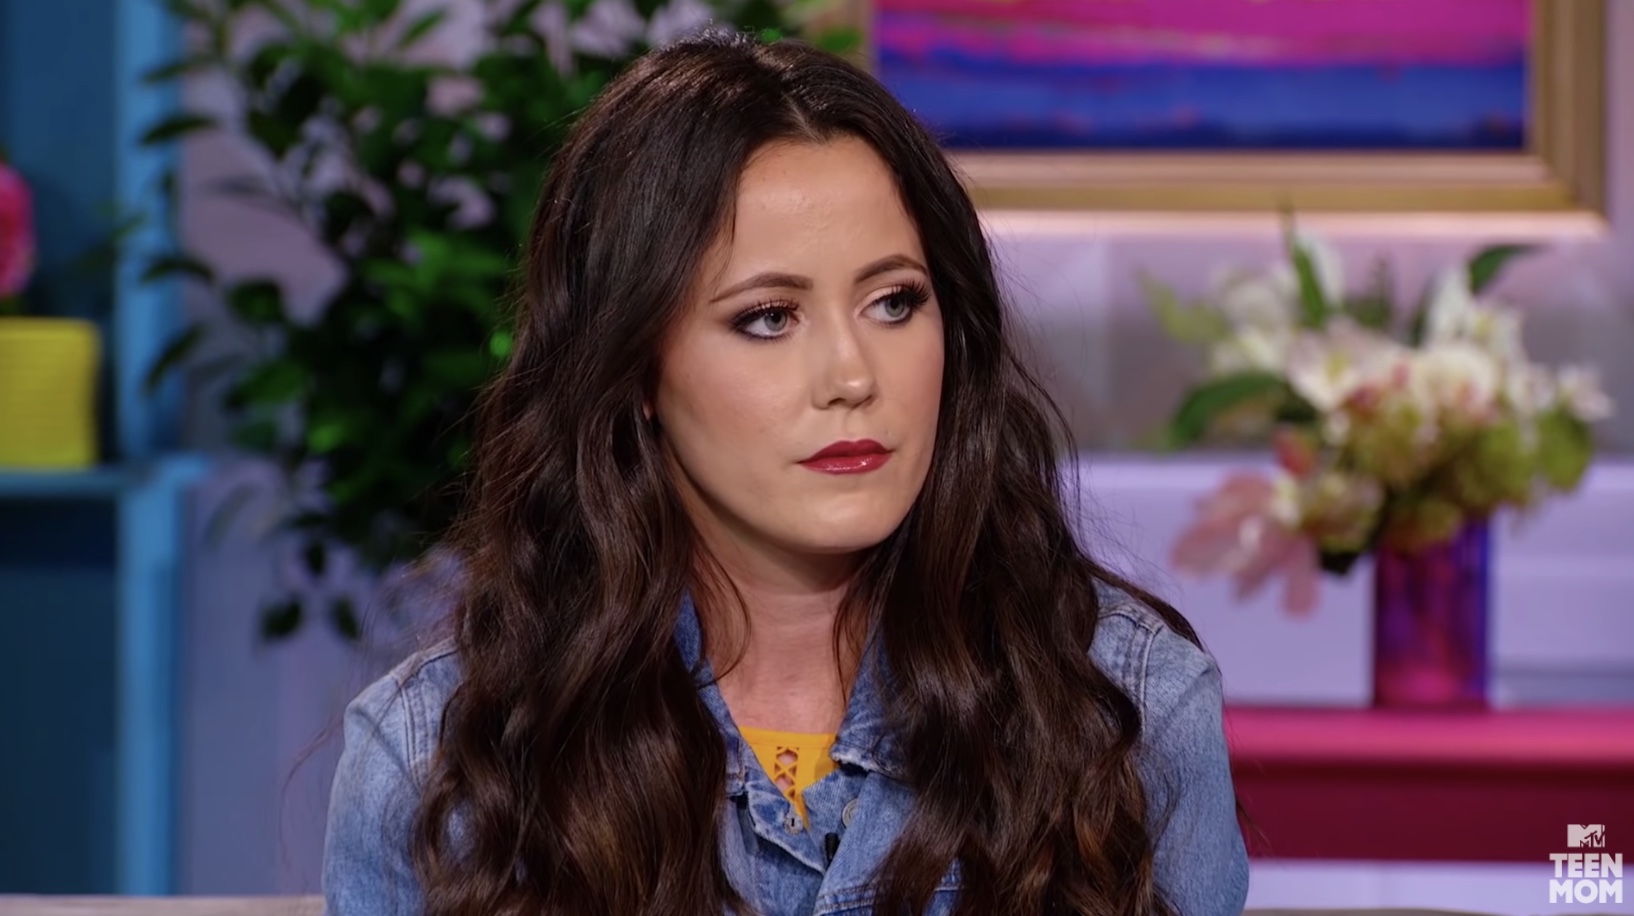 Jenelle Evans has returned to the Teen Mom franchise after being fired from the show in 2019